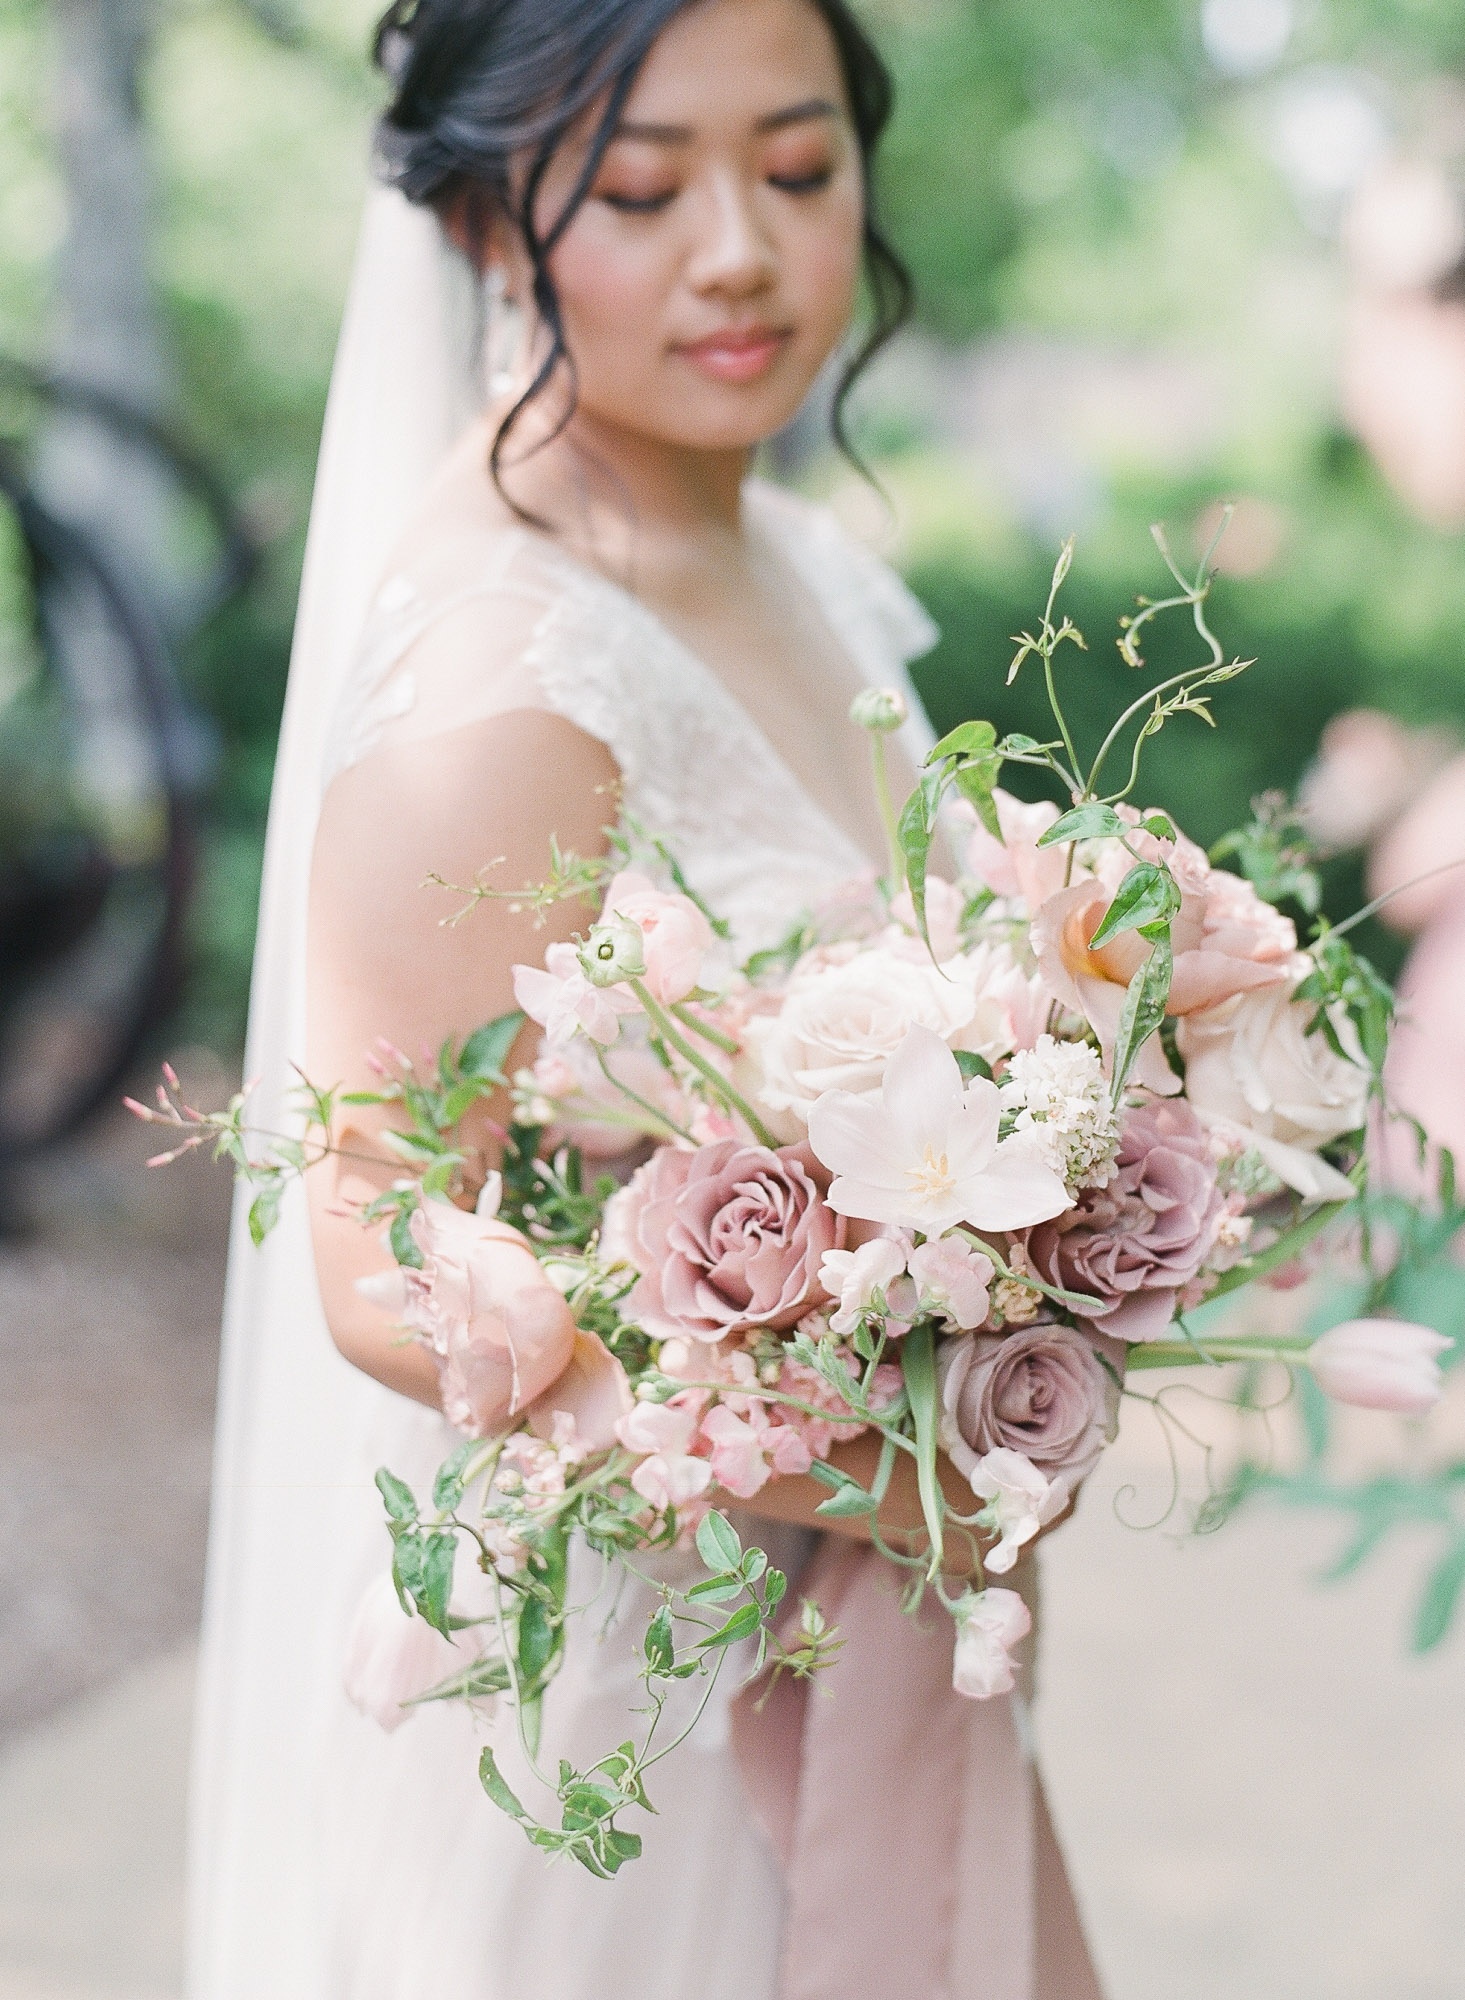 a wedding bouquet for the bride